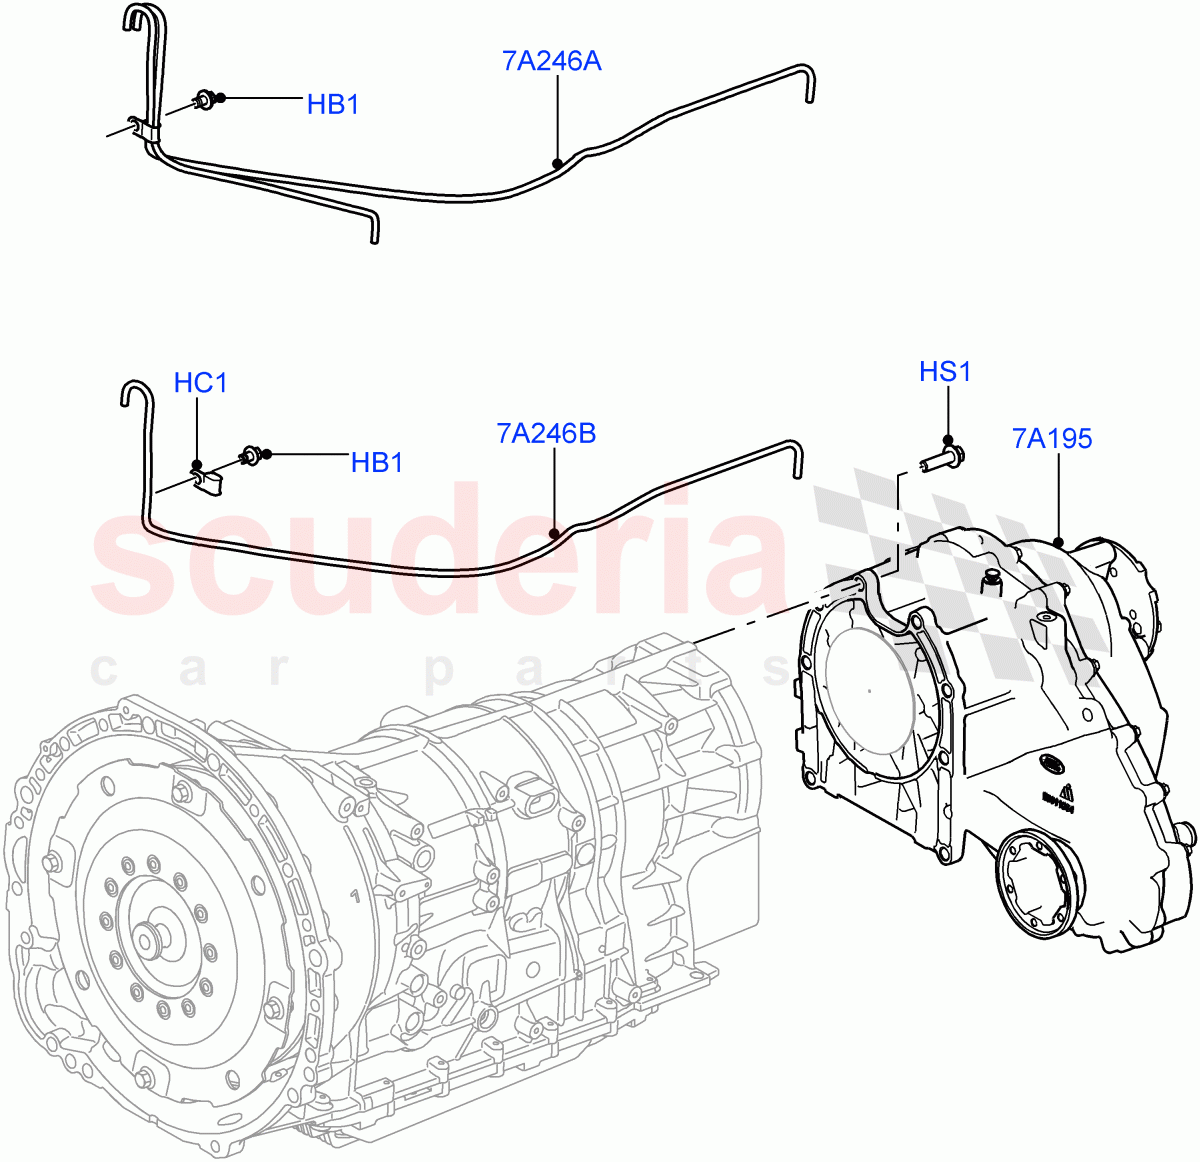 Transfer Drive Case(8 Speed Auto Trans ZF 8HP70 4WD,With 1 Speed Transfer Case,8 Speed Auto Trans ZF 8HP45)((V)FROMEA000001,(V)TOGA999999) of Land Rover Land Rover Discovery 4 (2010-2016) [4.0 Petrol V6]